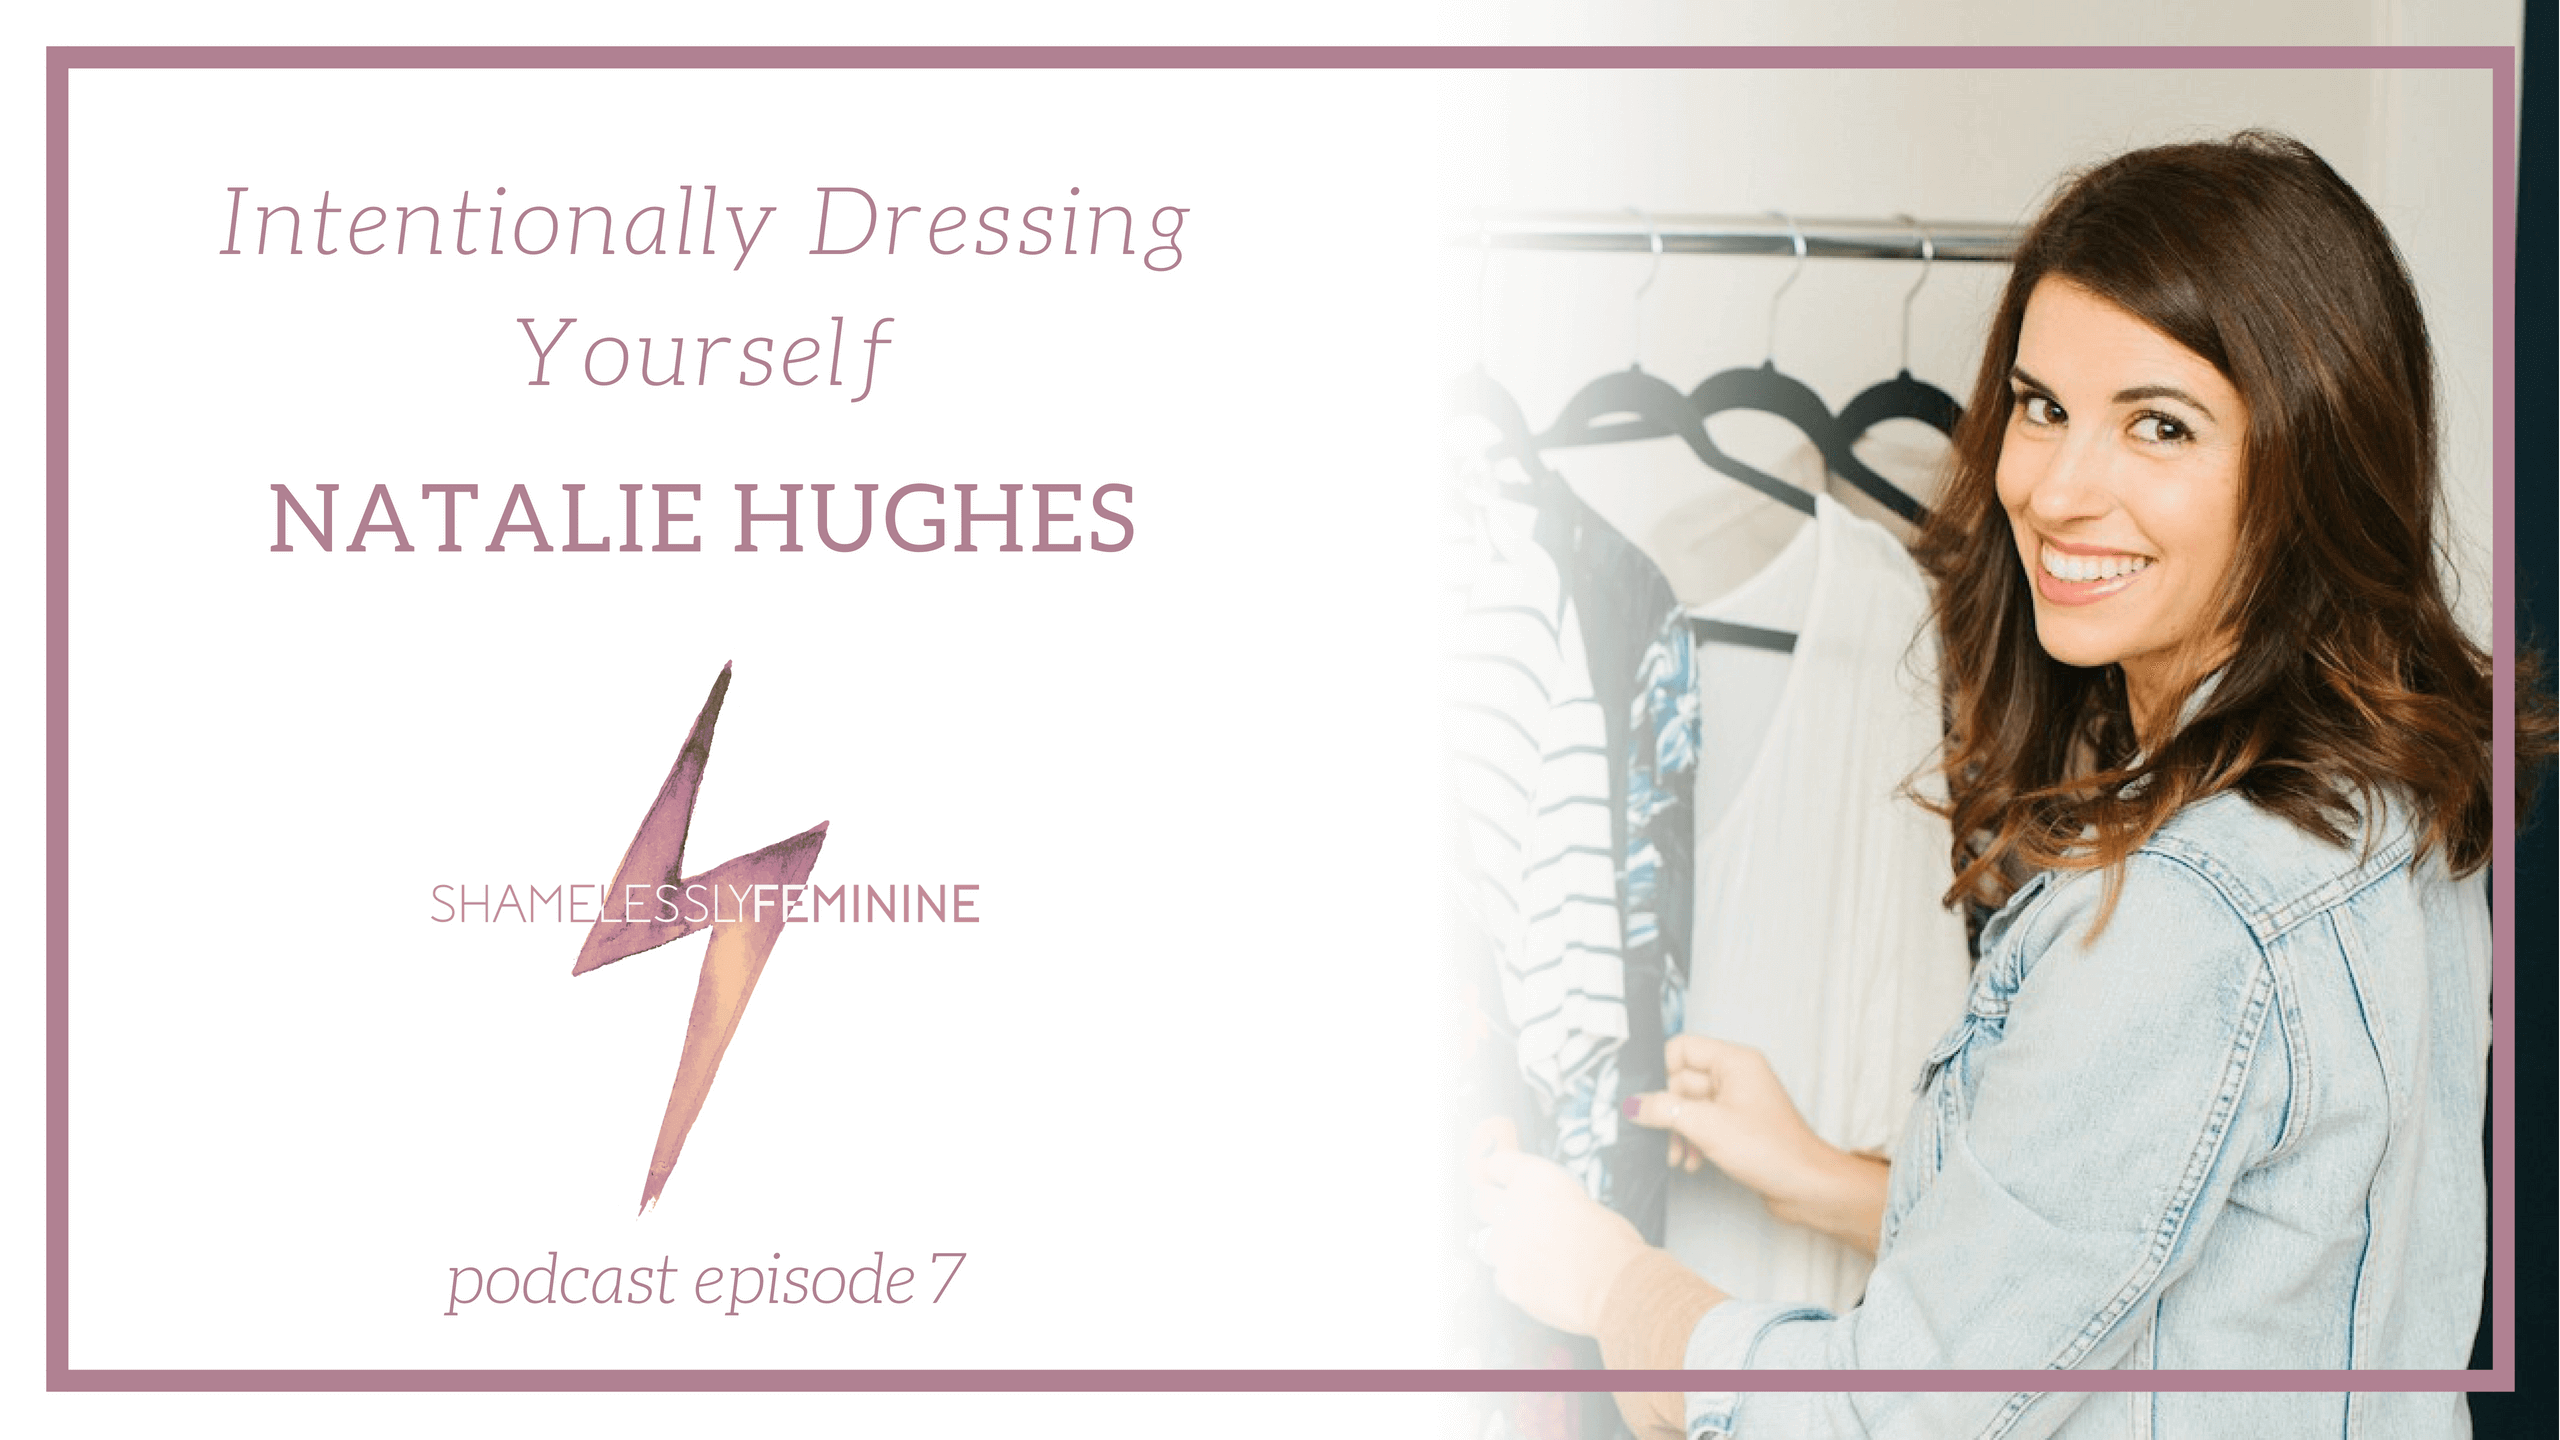 Episode 7: Intentionally Dressing Yourself with Natalie Hughes